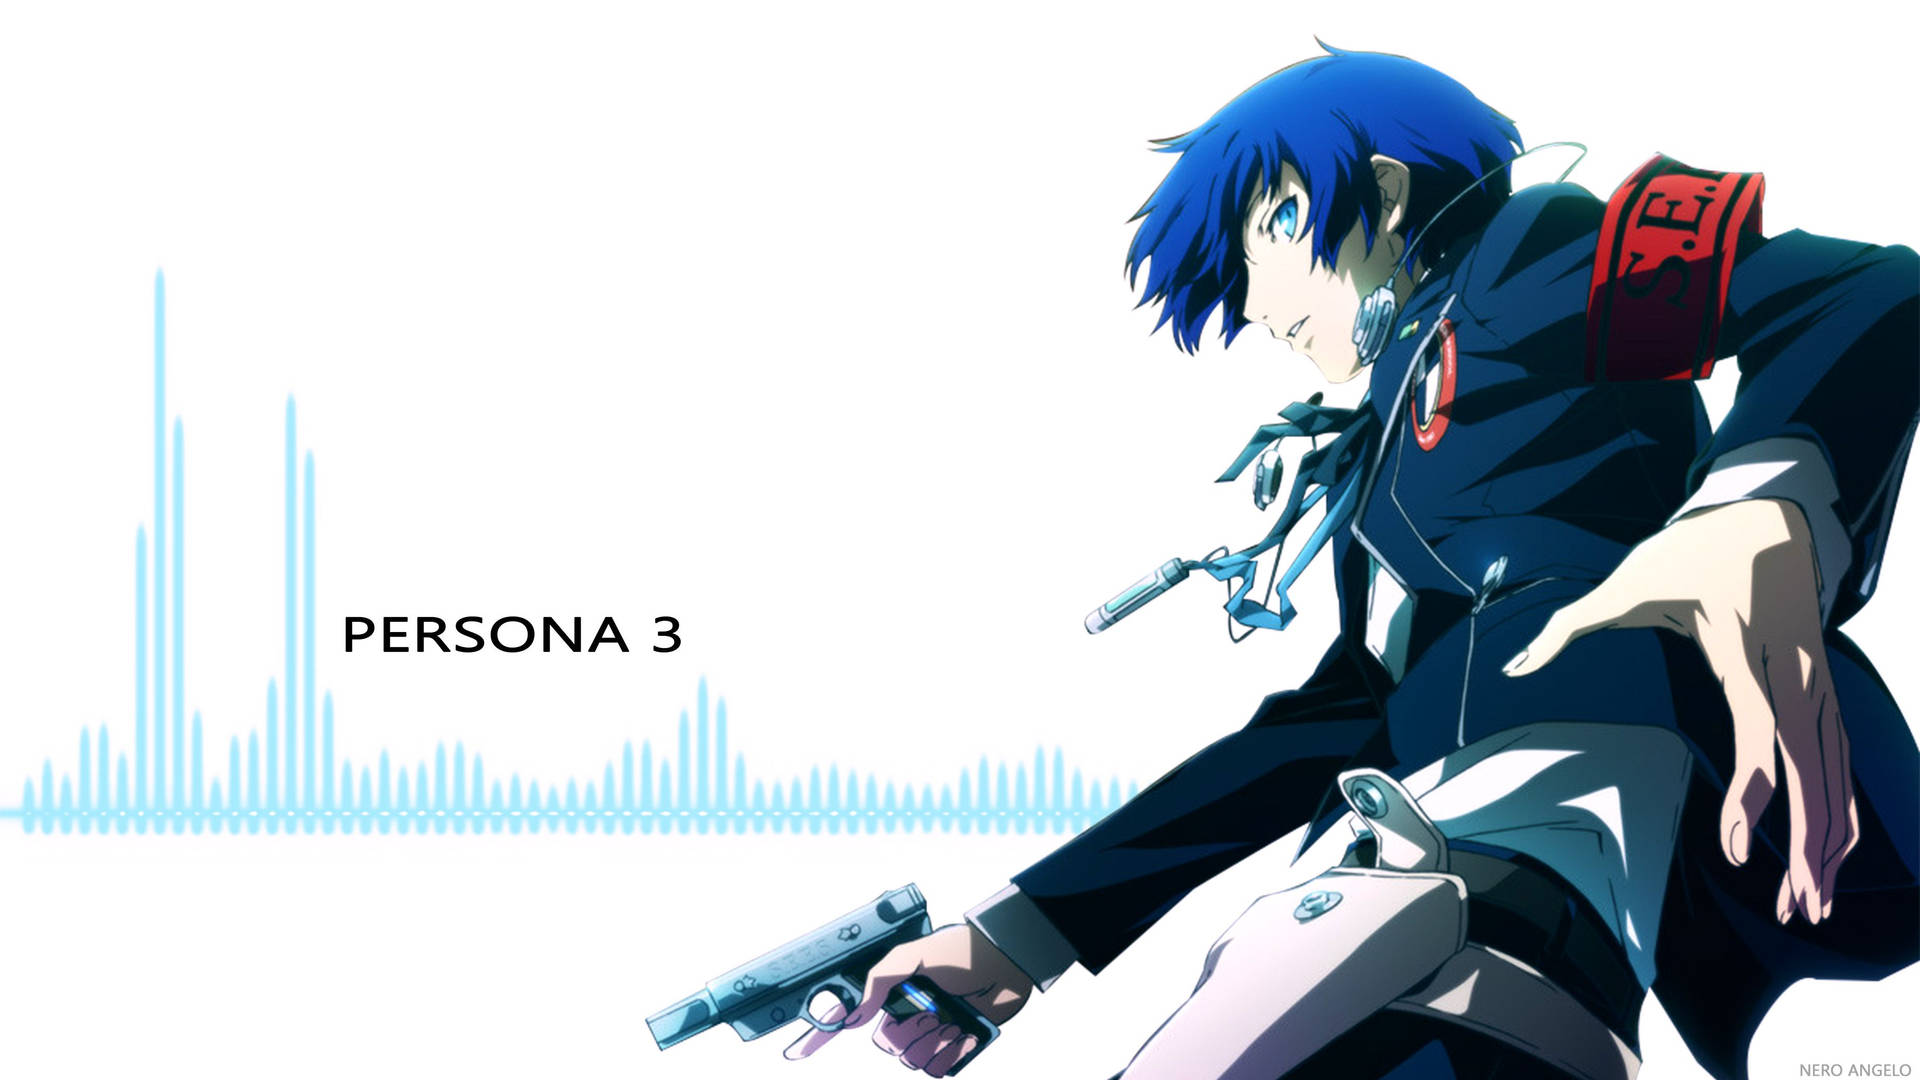 Top 999+ Persona 3 Wallpaper Full HD, 4K✅Free to Use